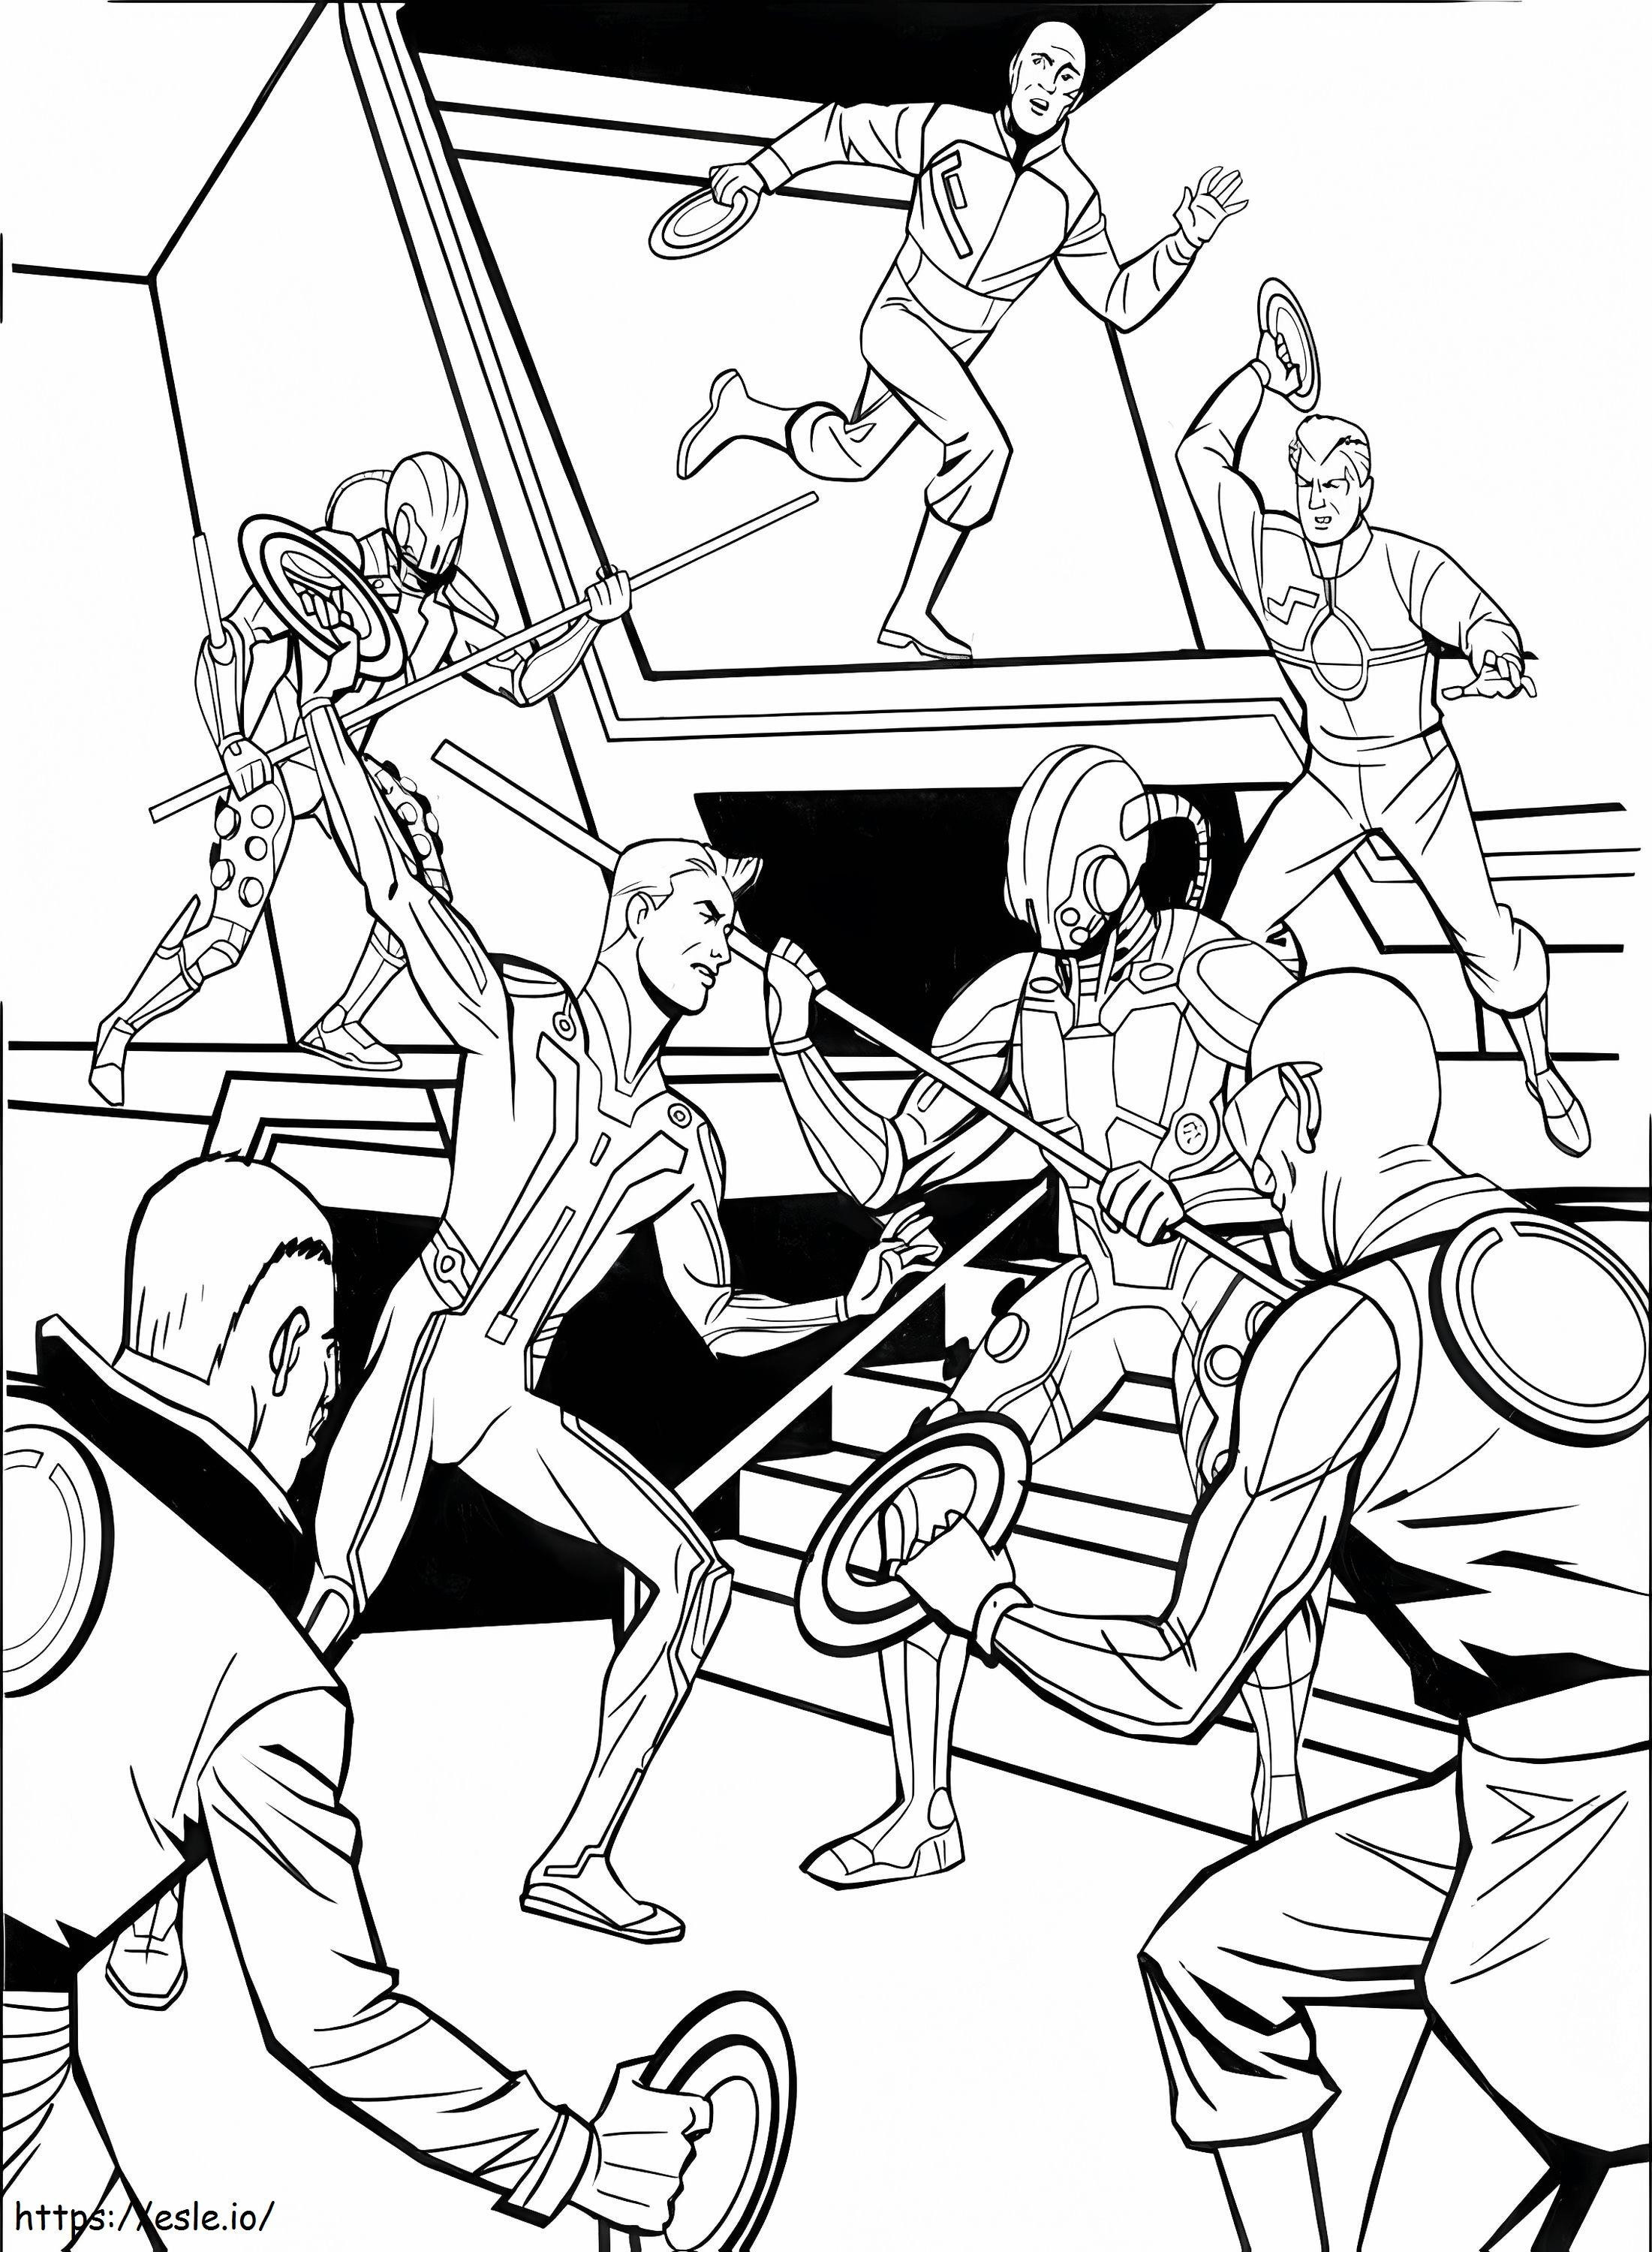 Fighting Tron coloring page